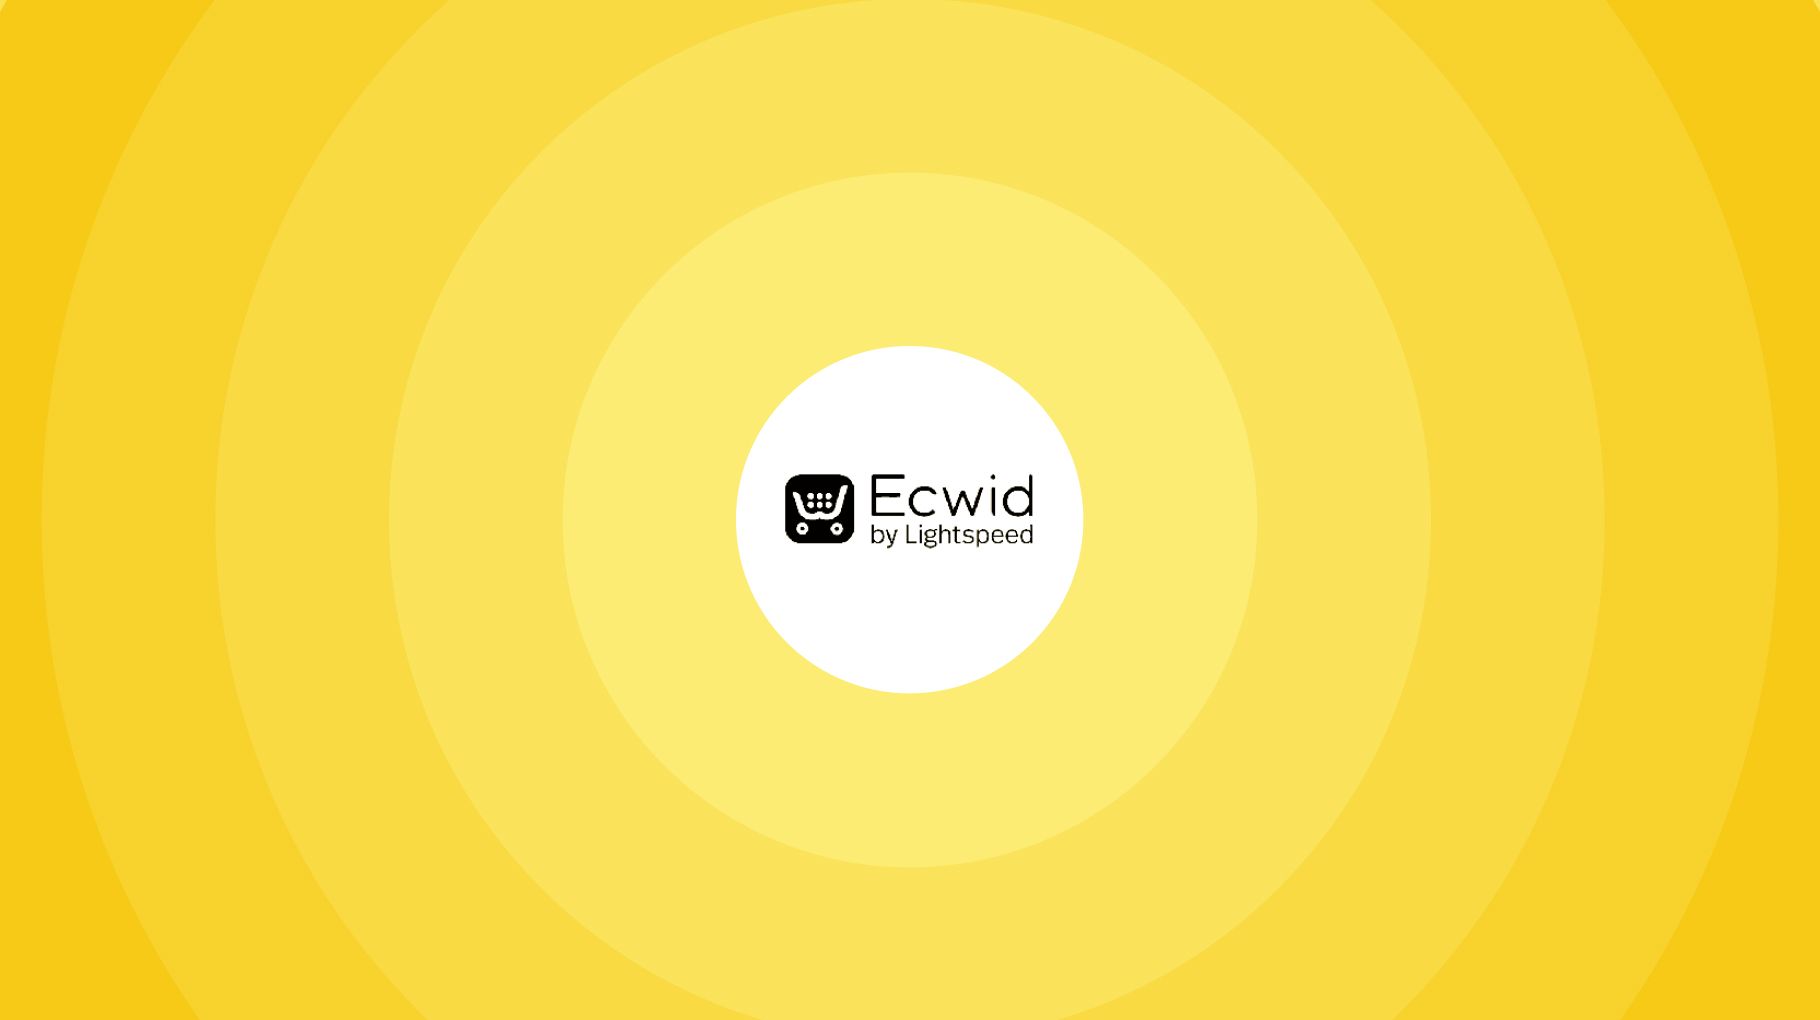 Ecwid growth and research statistics